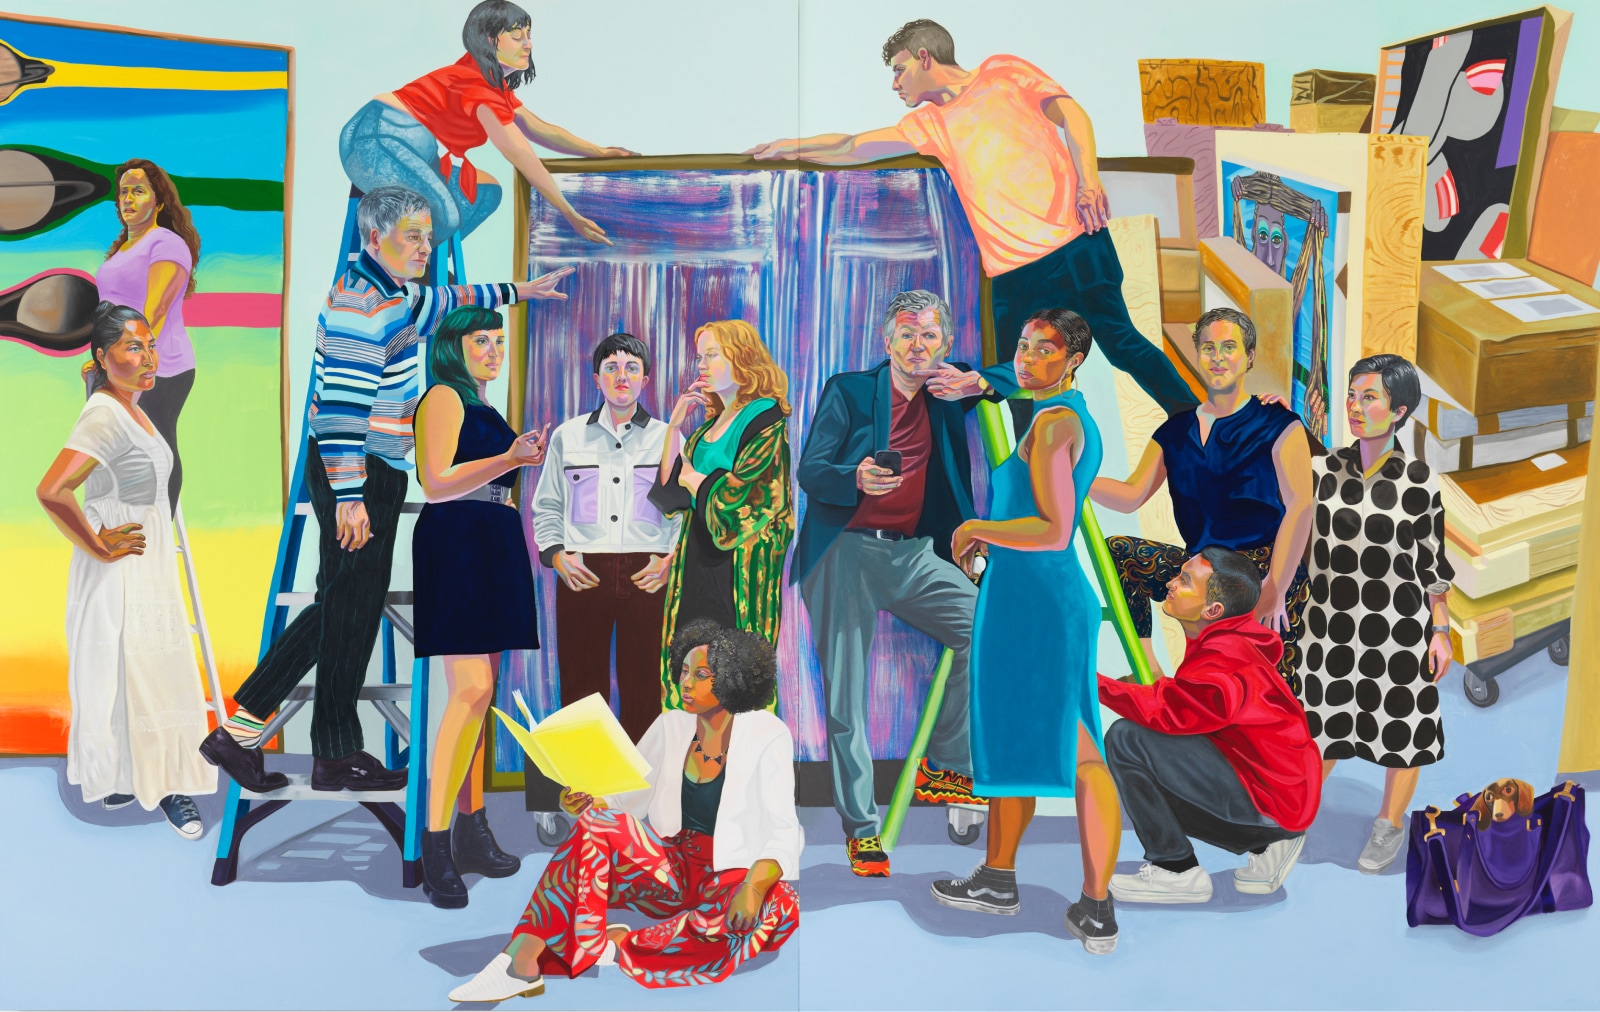 Artwork with a diverse group of gallerists, surrounded by exhibiton pieces and storage boxes